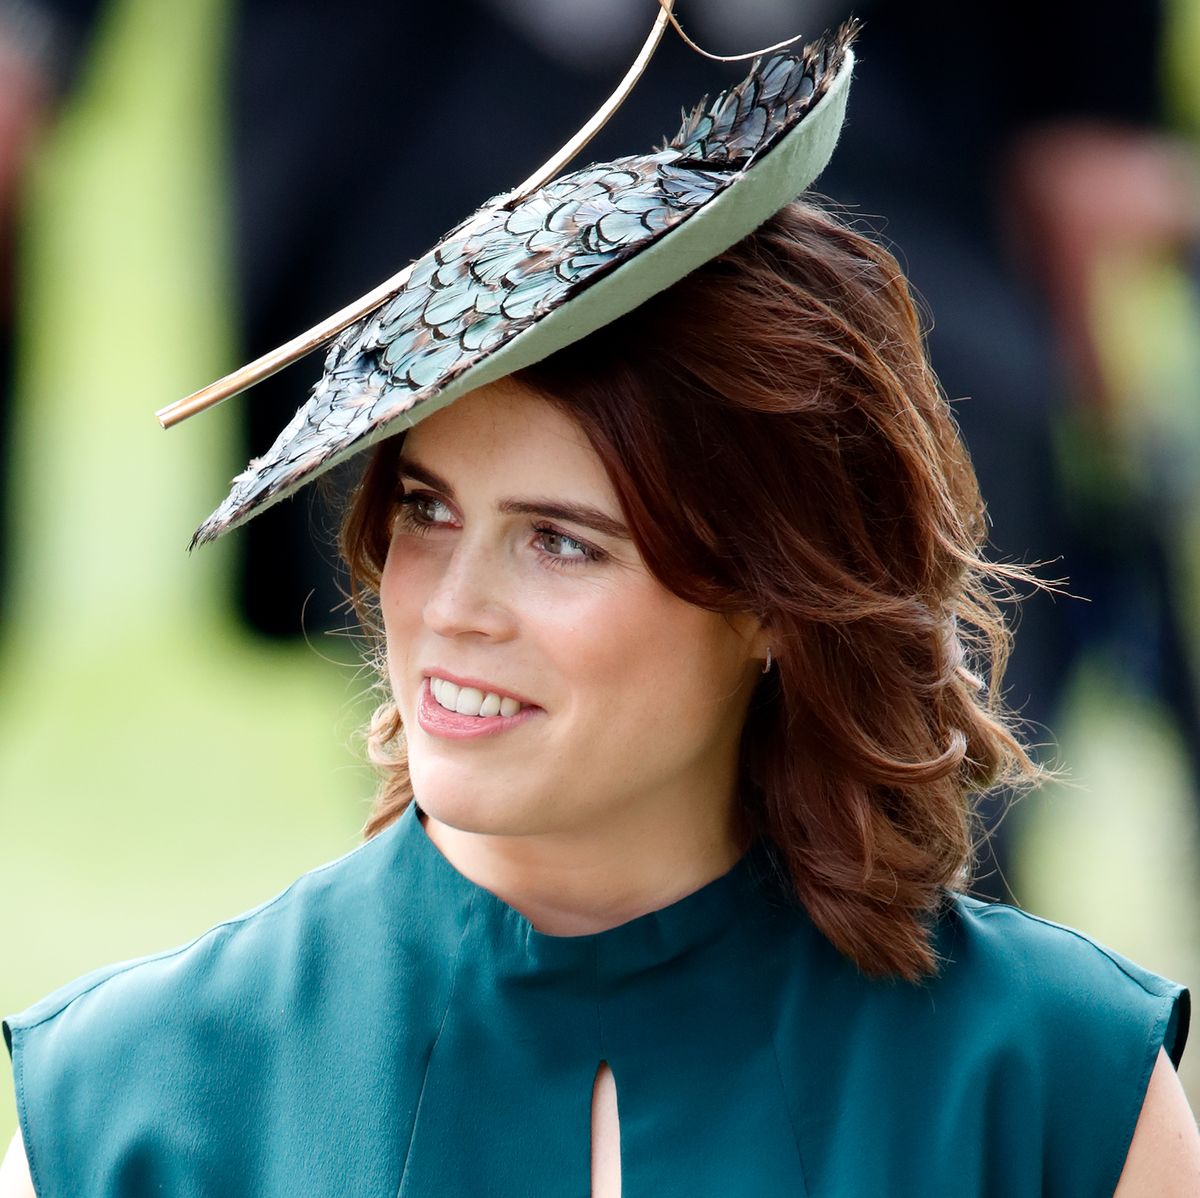 Who Is Princess Eugenie? 8 Facts to Know About the Royal